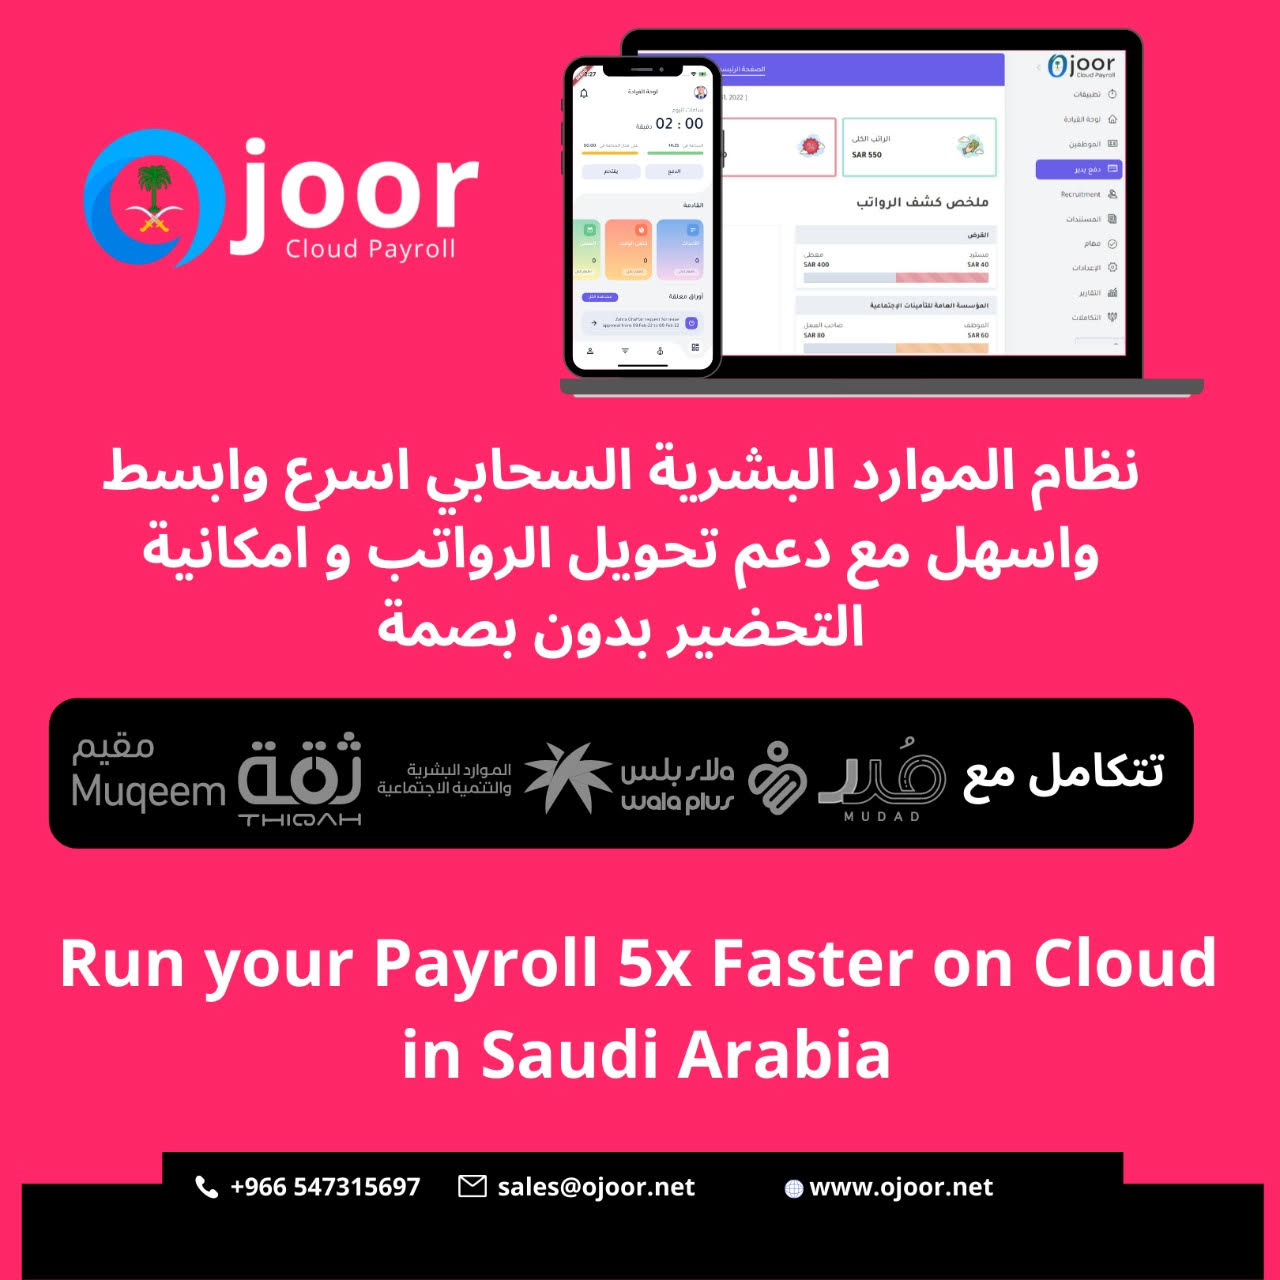 How to improve experience with Payroll System in Saudi?